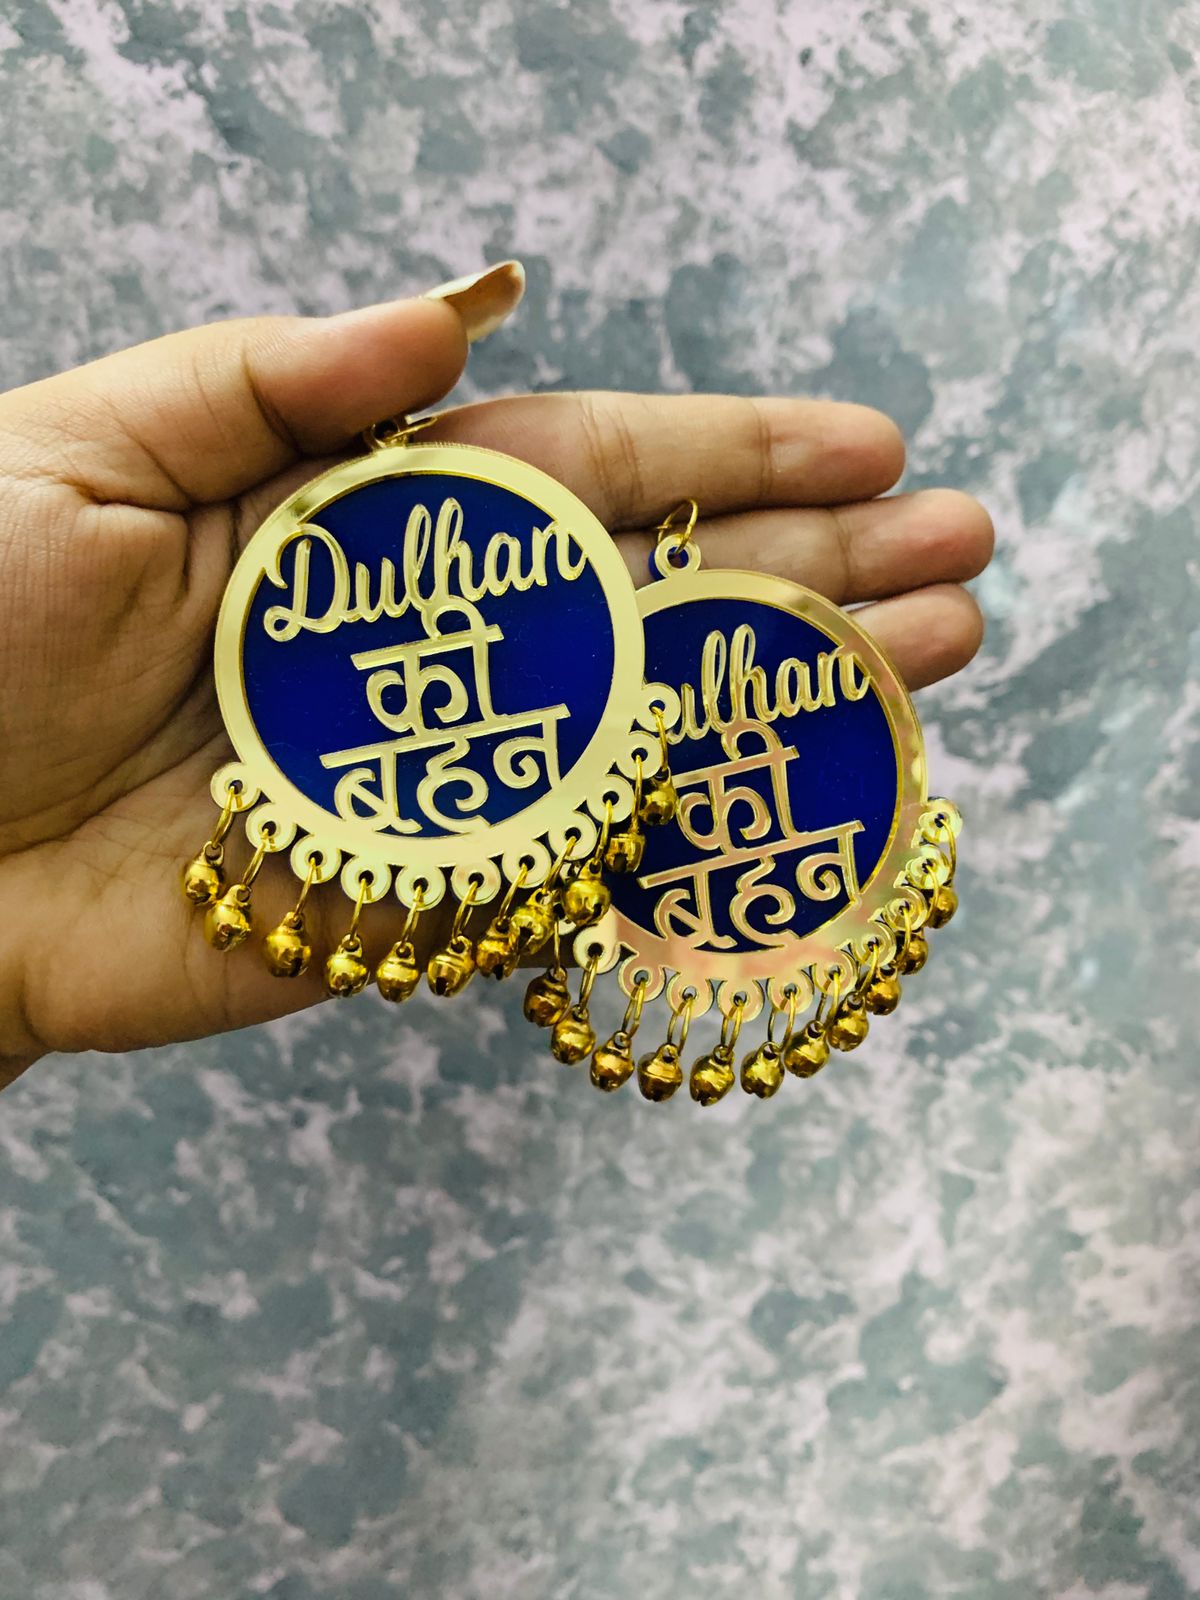 Beautiful Bride aradhanadas00 in our customized Dulhaniya Earrings  Dm  to order yours customized products Follow bridesspecial for   Instagram